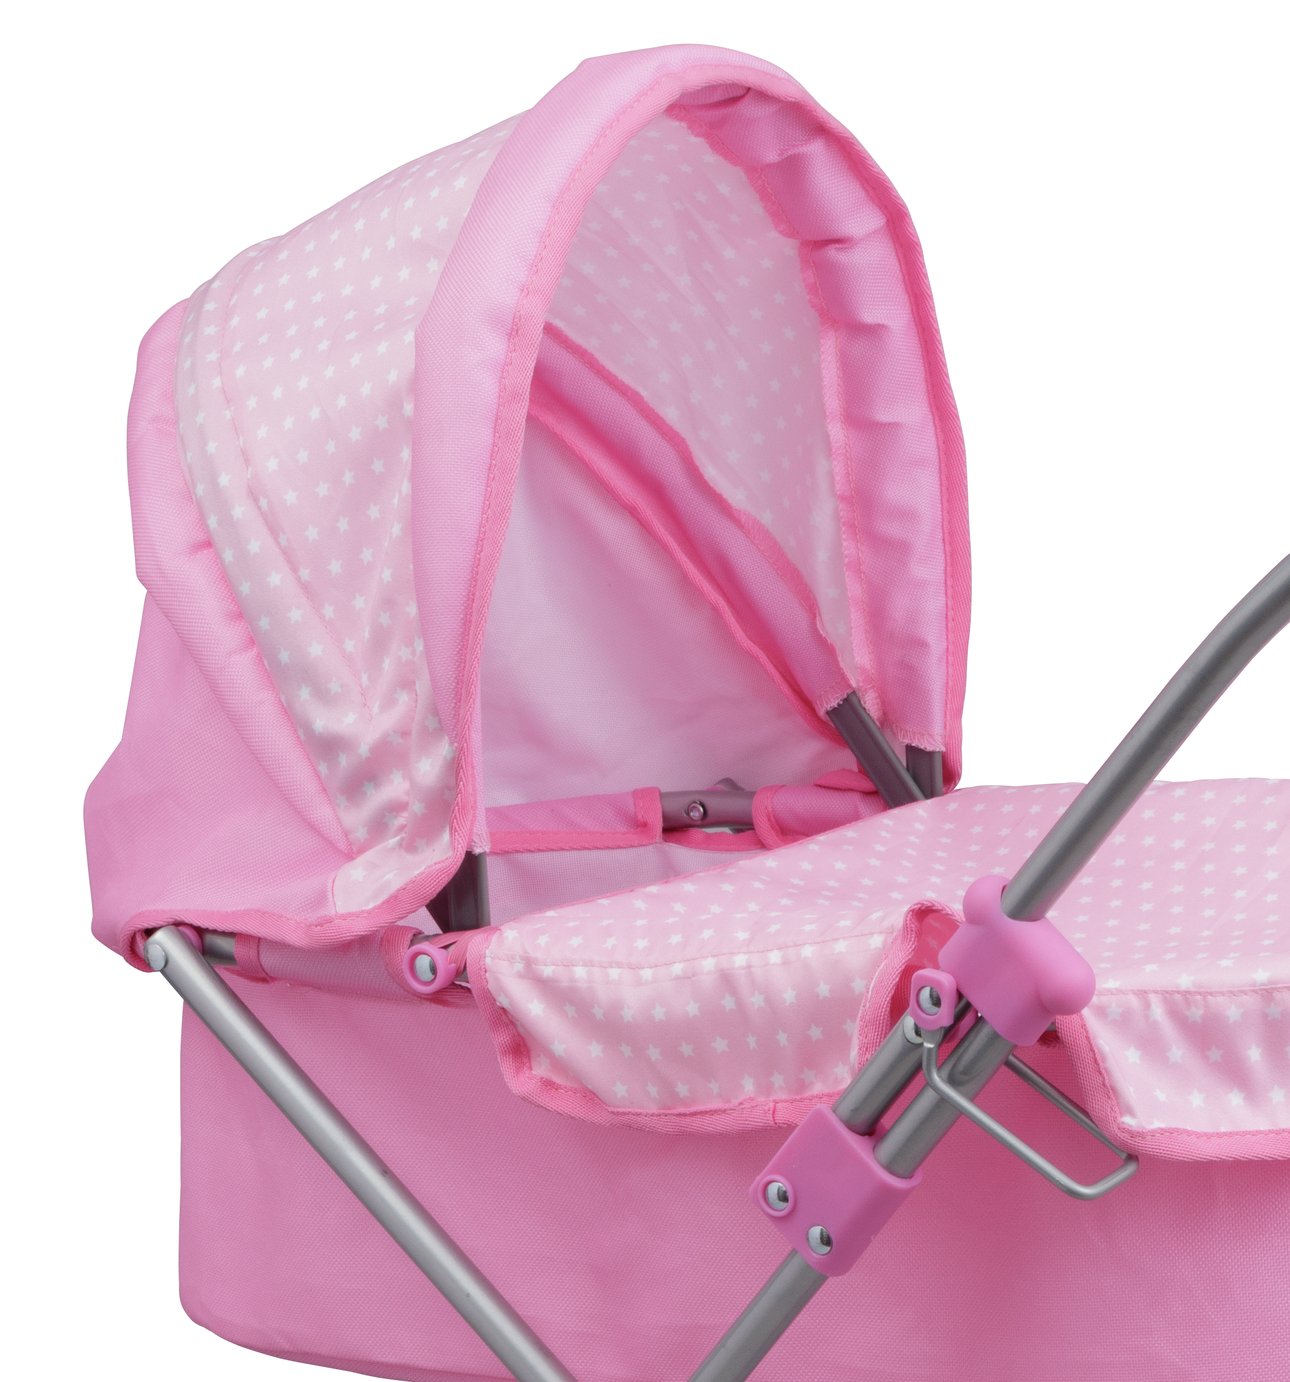 Chad Valley Babies to Love My First Pram Review